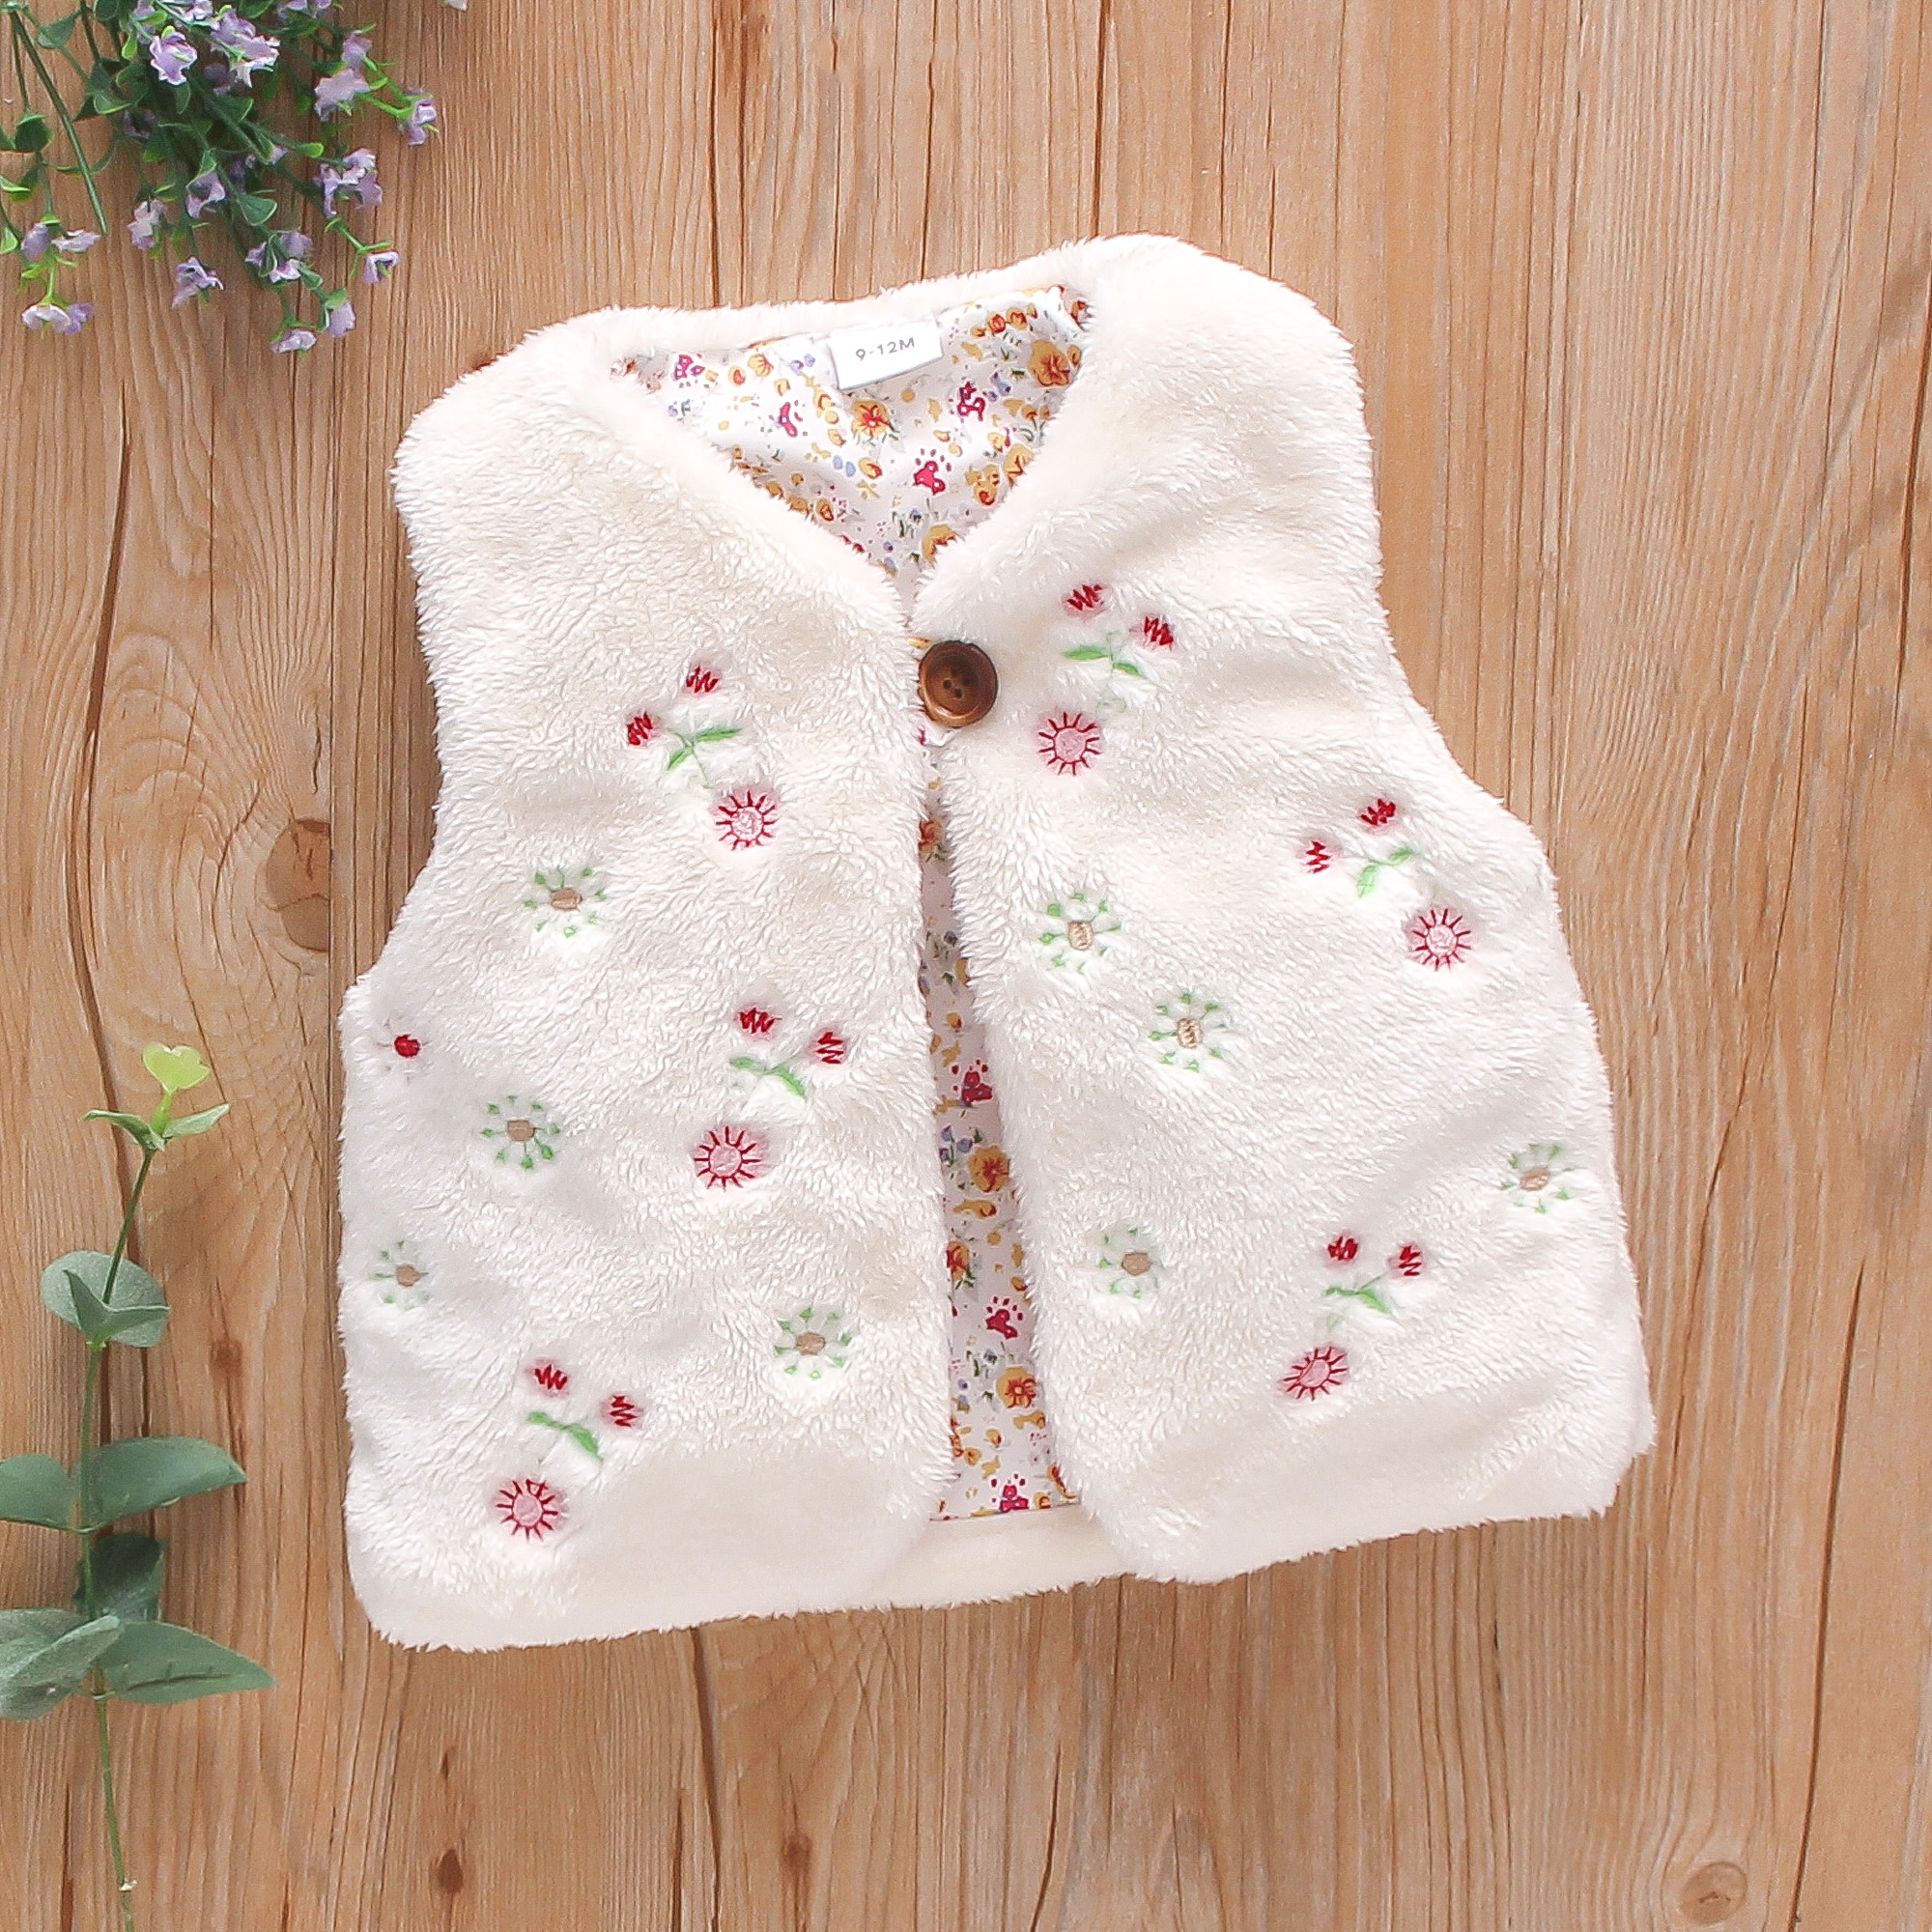 Spring and autumn new baby girl coat cute embroidered sleeveless